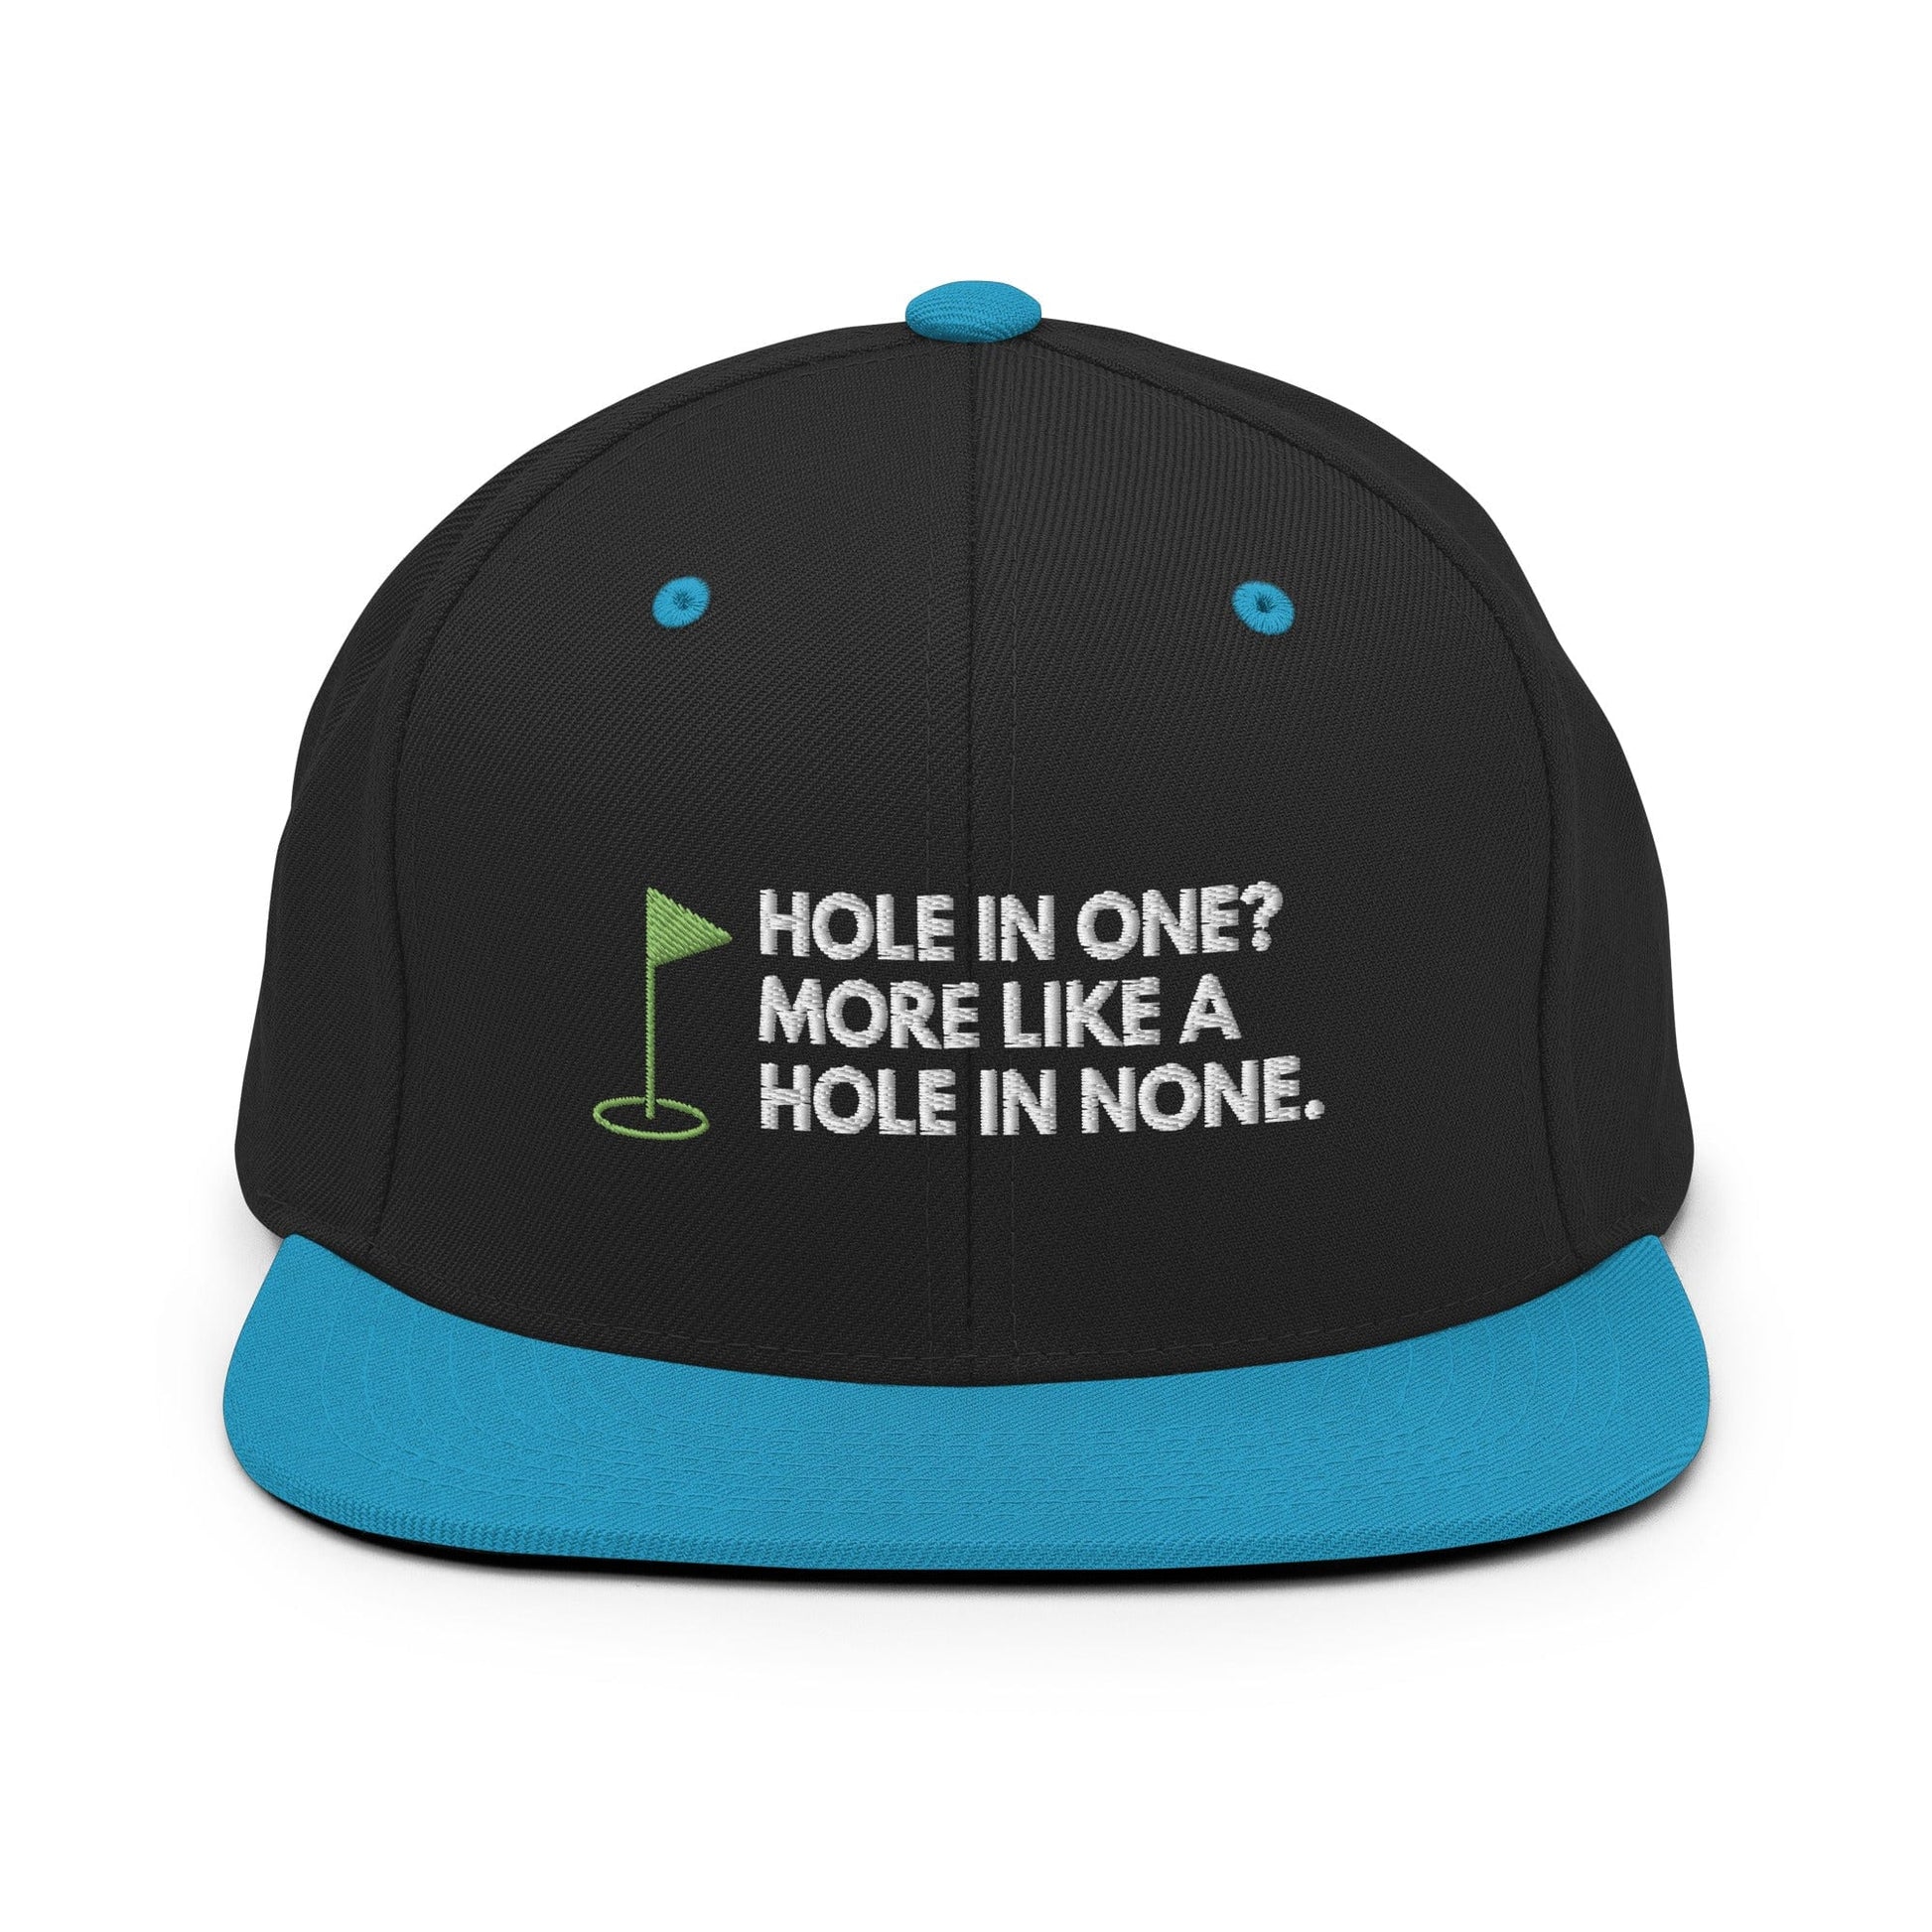 Funny Golfer Gifts  Snapback Hat Black/ Teal Hole In One More Like Hole In None Hat Snapback Hat